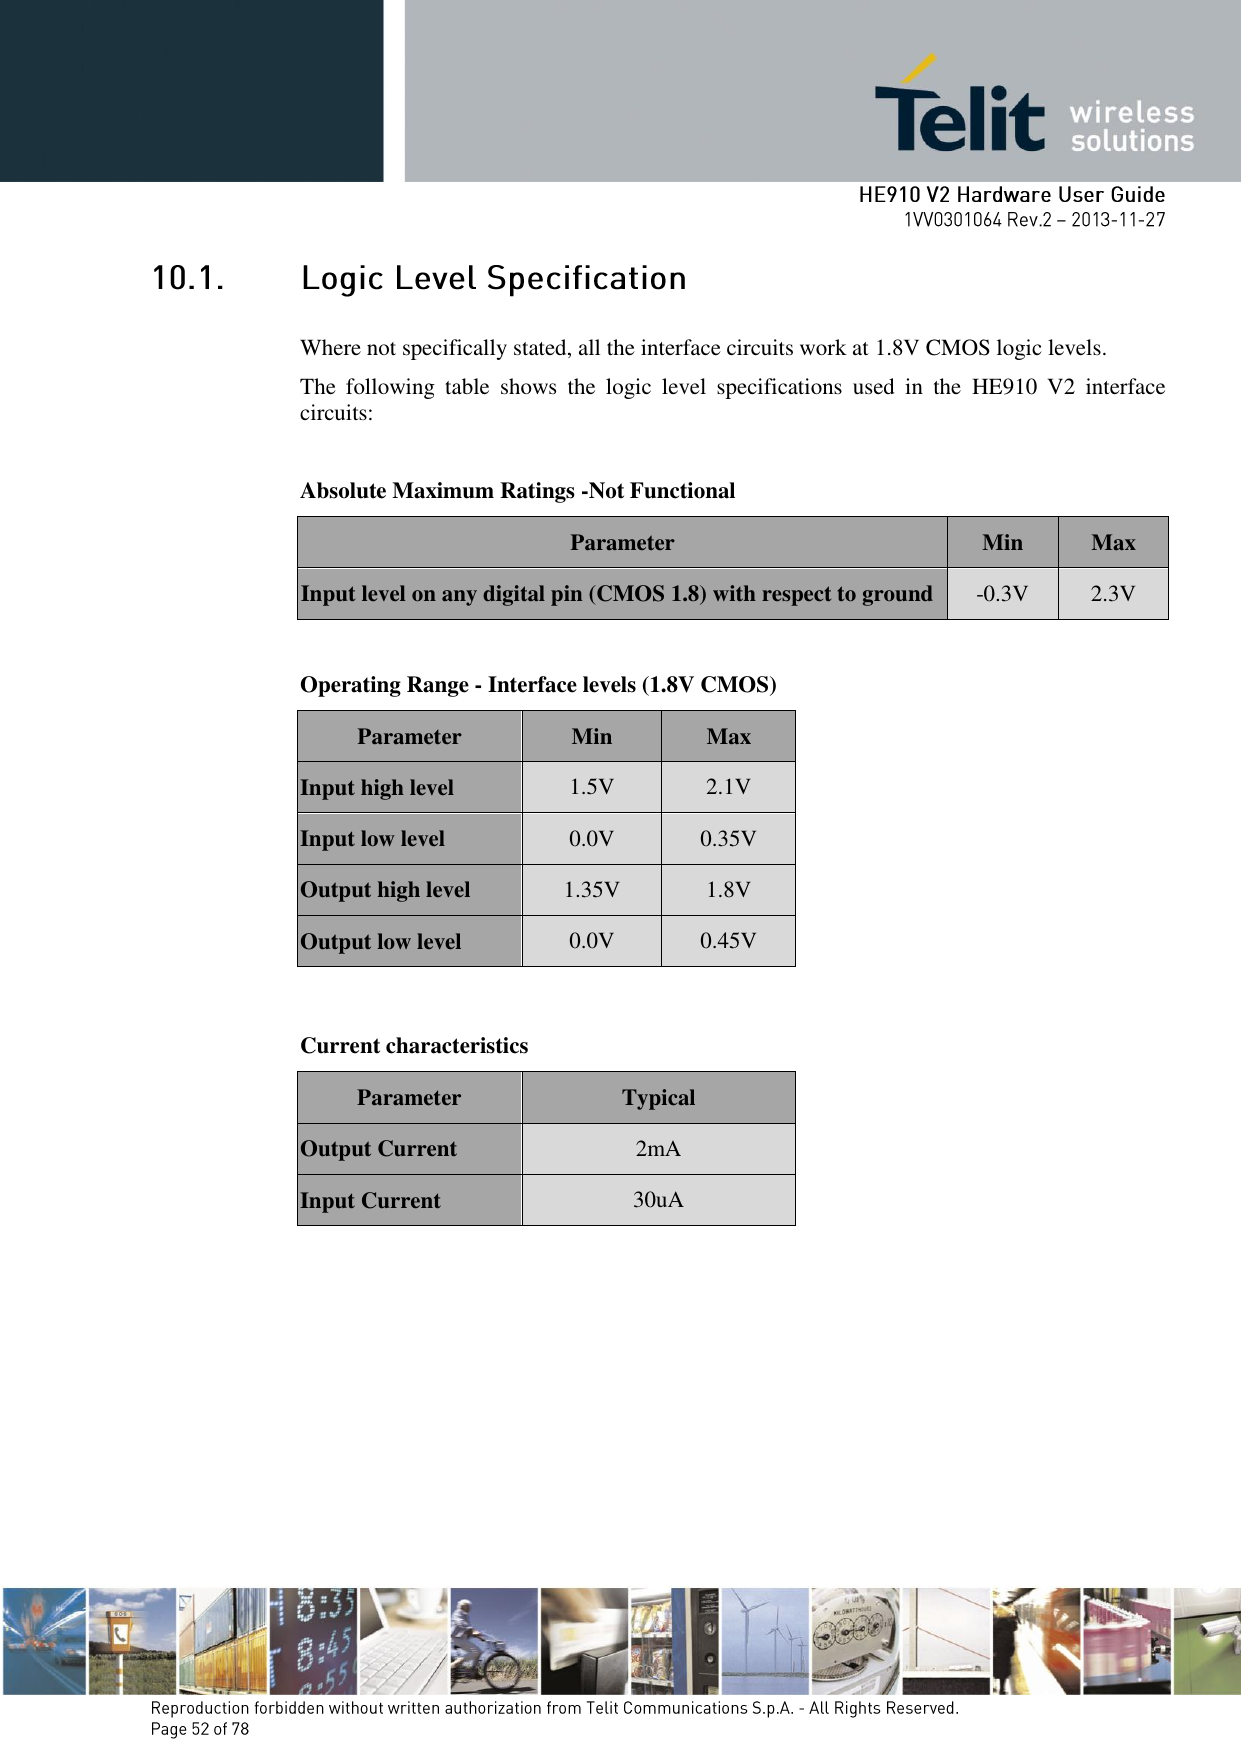        Where not specifically stated, all the interface circuits work at 1.8V CMOS logic levels. The  following  table  shows  the  logic  level  specifications  used  in  the  HE910  V2  interface circuits:  Absolute Maximum Ratings -Not Functional Parameter Min Max Input level on any digital pin (CMOS 1.8) with respect to ground -0.3V 2.3V  Operating Range - Interface levels (1.8V CMOS) Parameter Min Max Input high level 1.5V 2.1V Input low level 0.0V 0.35V Output high level 1.35V 1.8V Output low level 0.0V 0.45V   Current characteristics  Parameter  Typical Output Current 2mA Input Current 30uA       